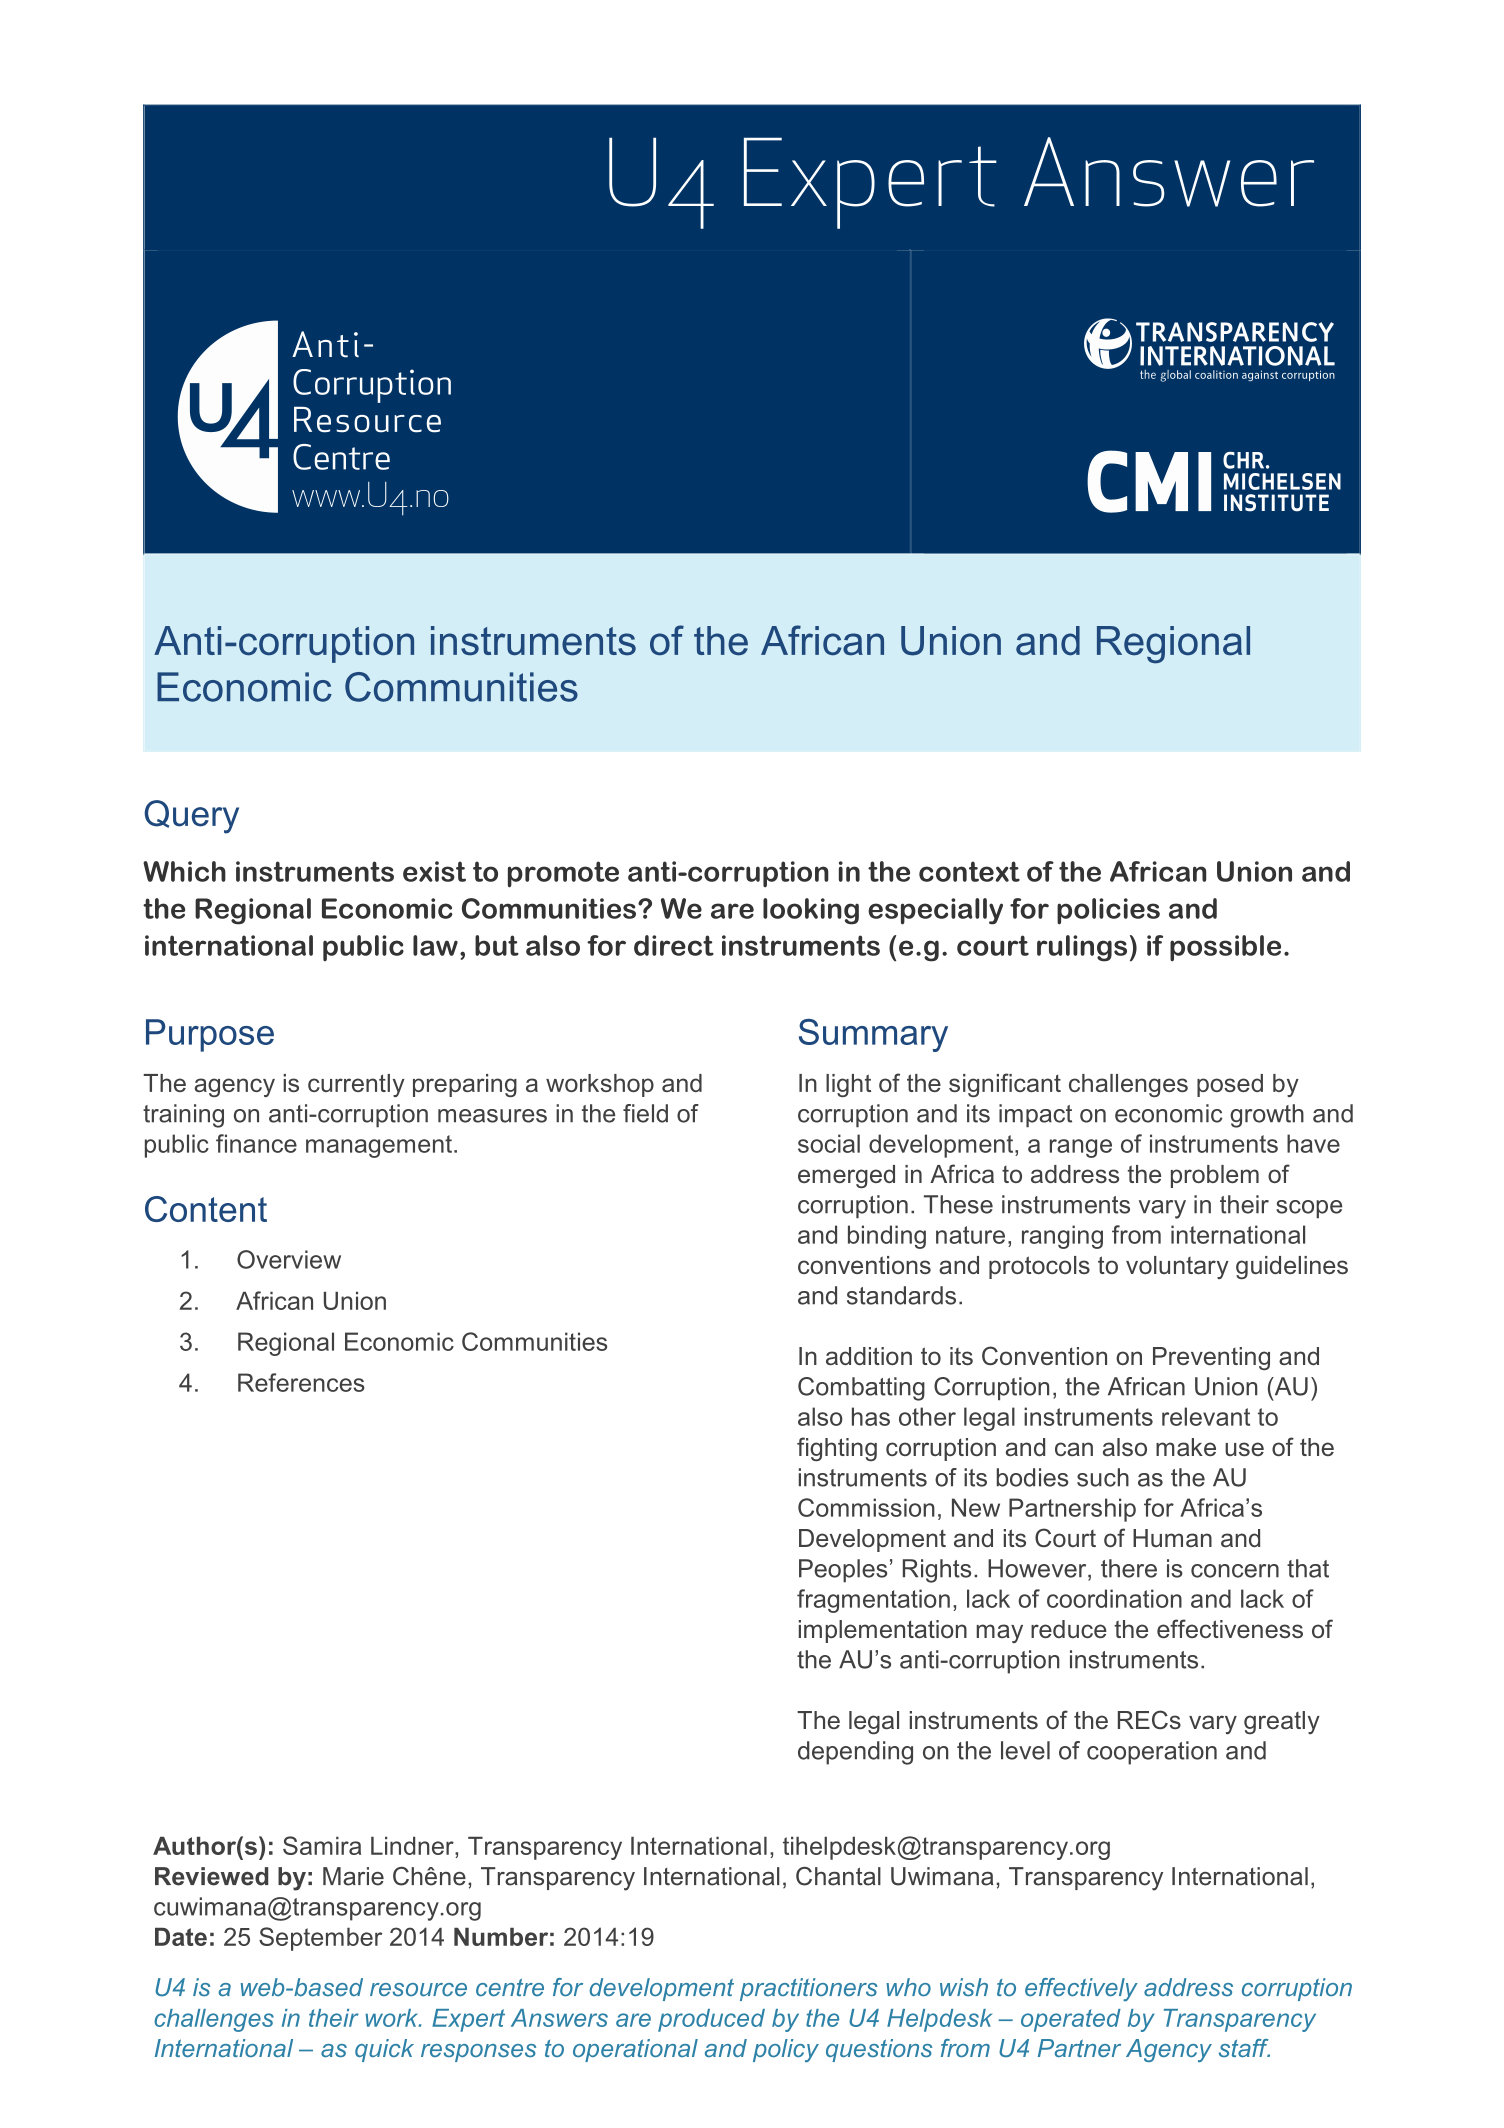 Anti-corruption instruments of the African Union and Regional Economic Communities